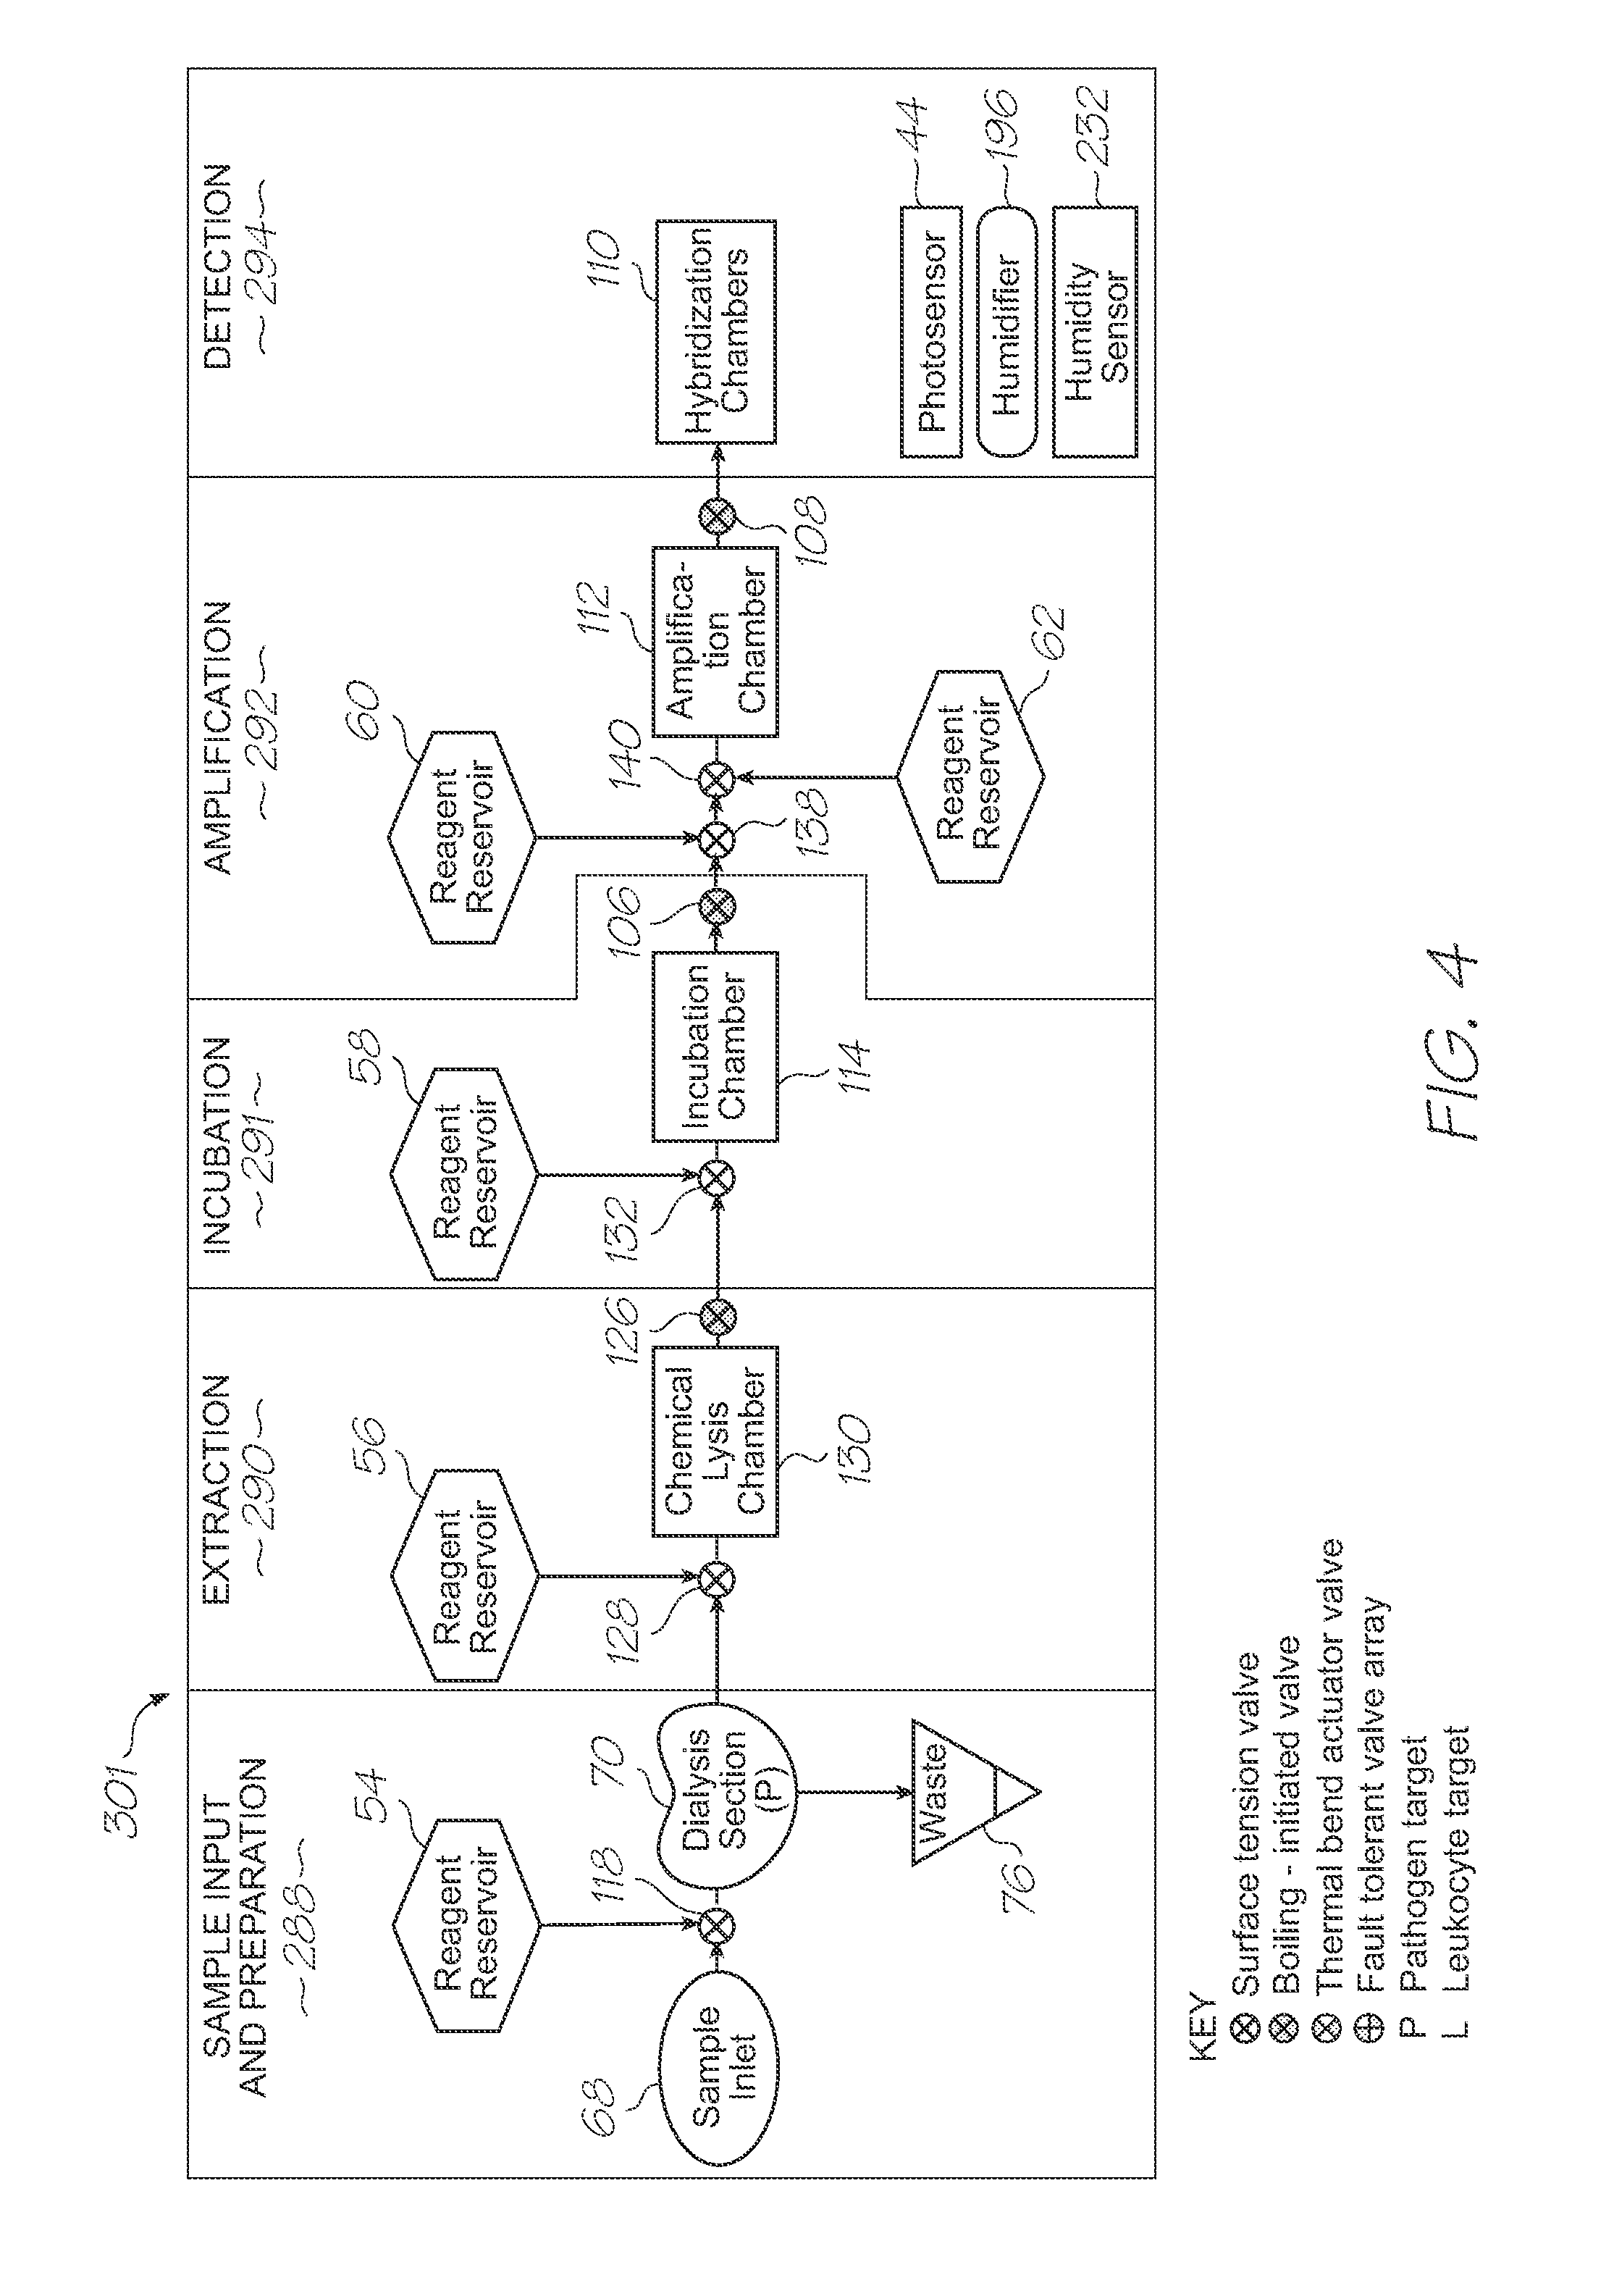 Test module with excitation light and mirrors for simultaneous excitation of oligonucleoutide probes